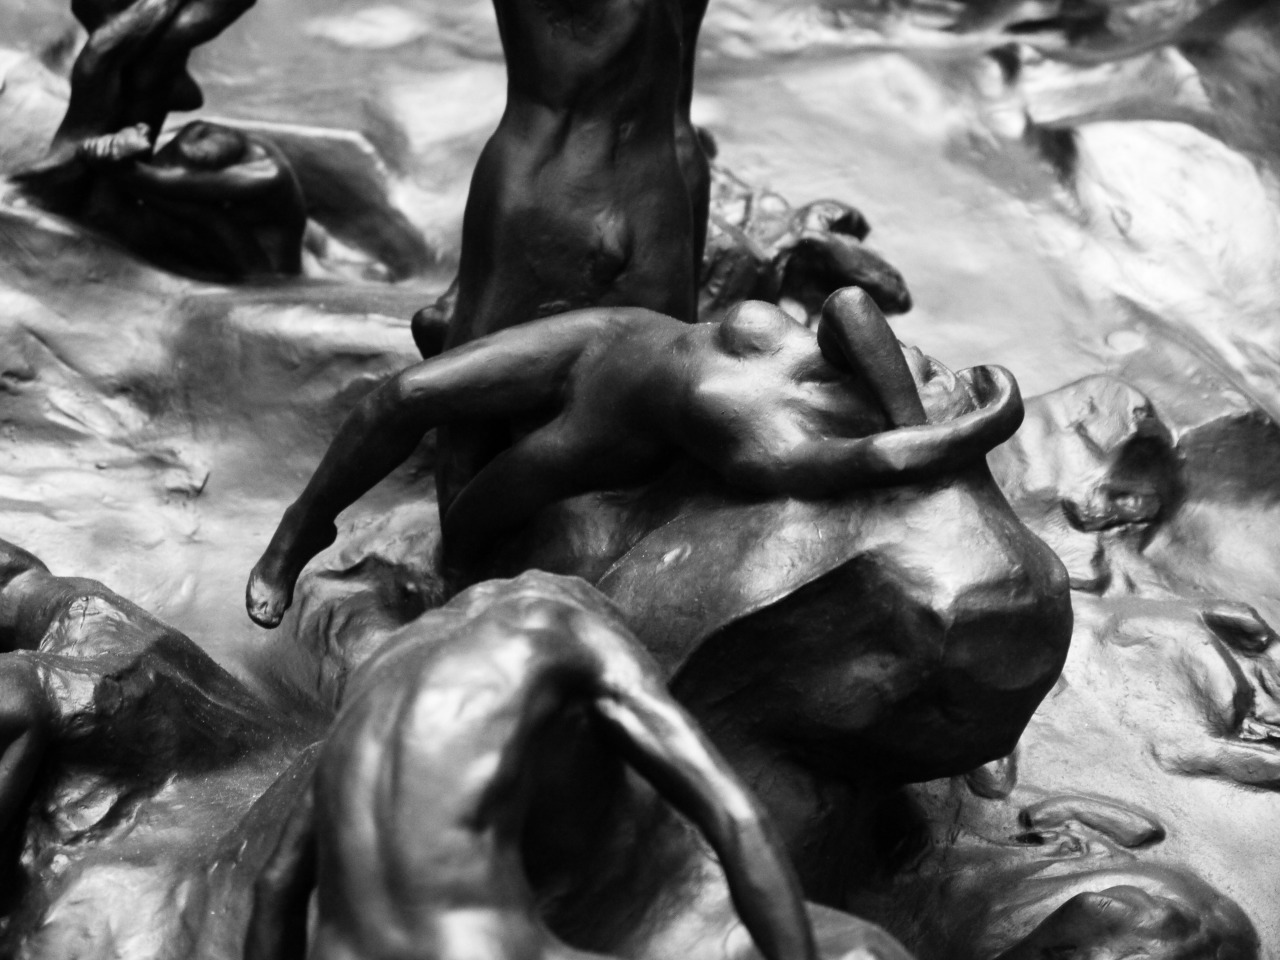 outerground:  Details from the Gates of Hell by Rodin. Bronze doors originally commissioned